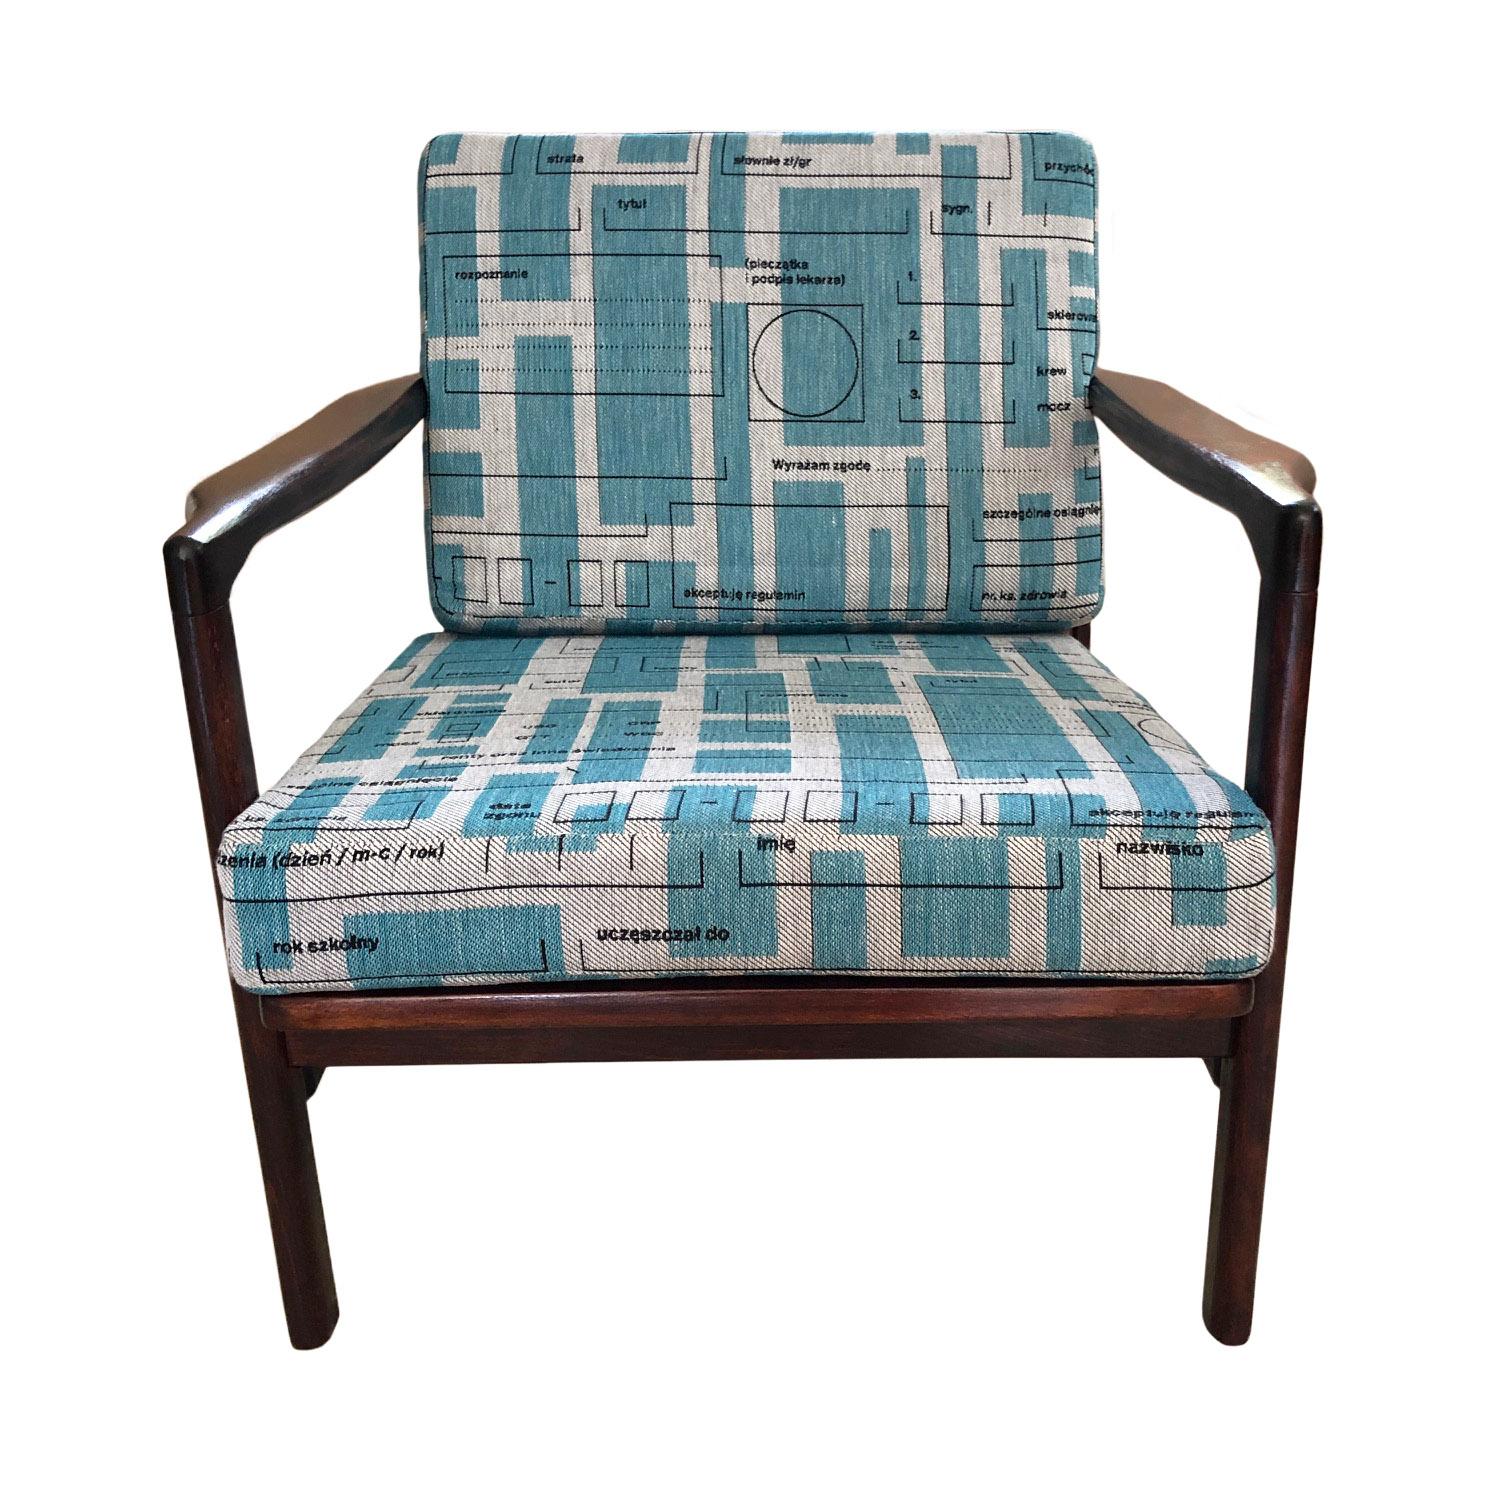 Polish Midcentury Lounge Armchairs Set in Blue Jacquard, Zenon Bączyk, 1960s For Sale